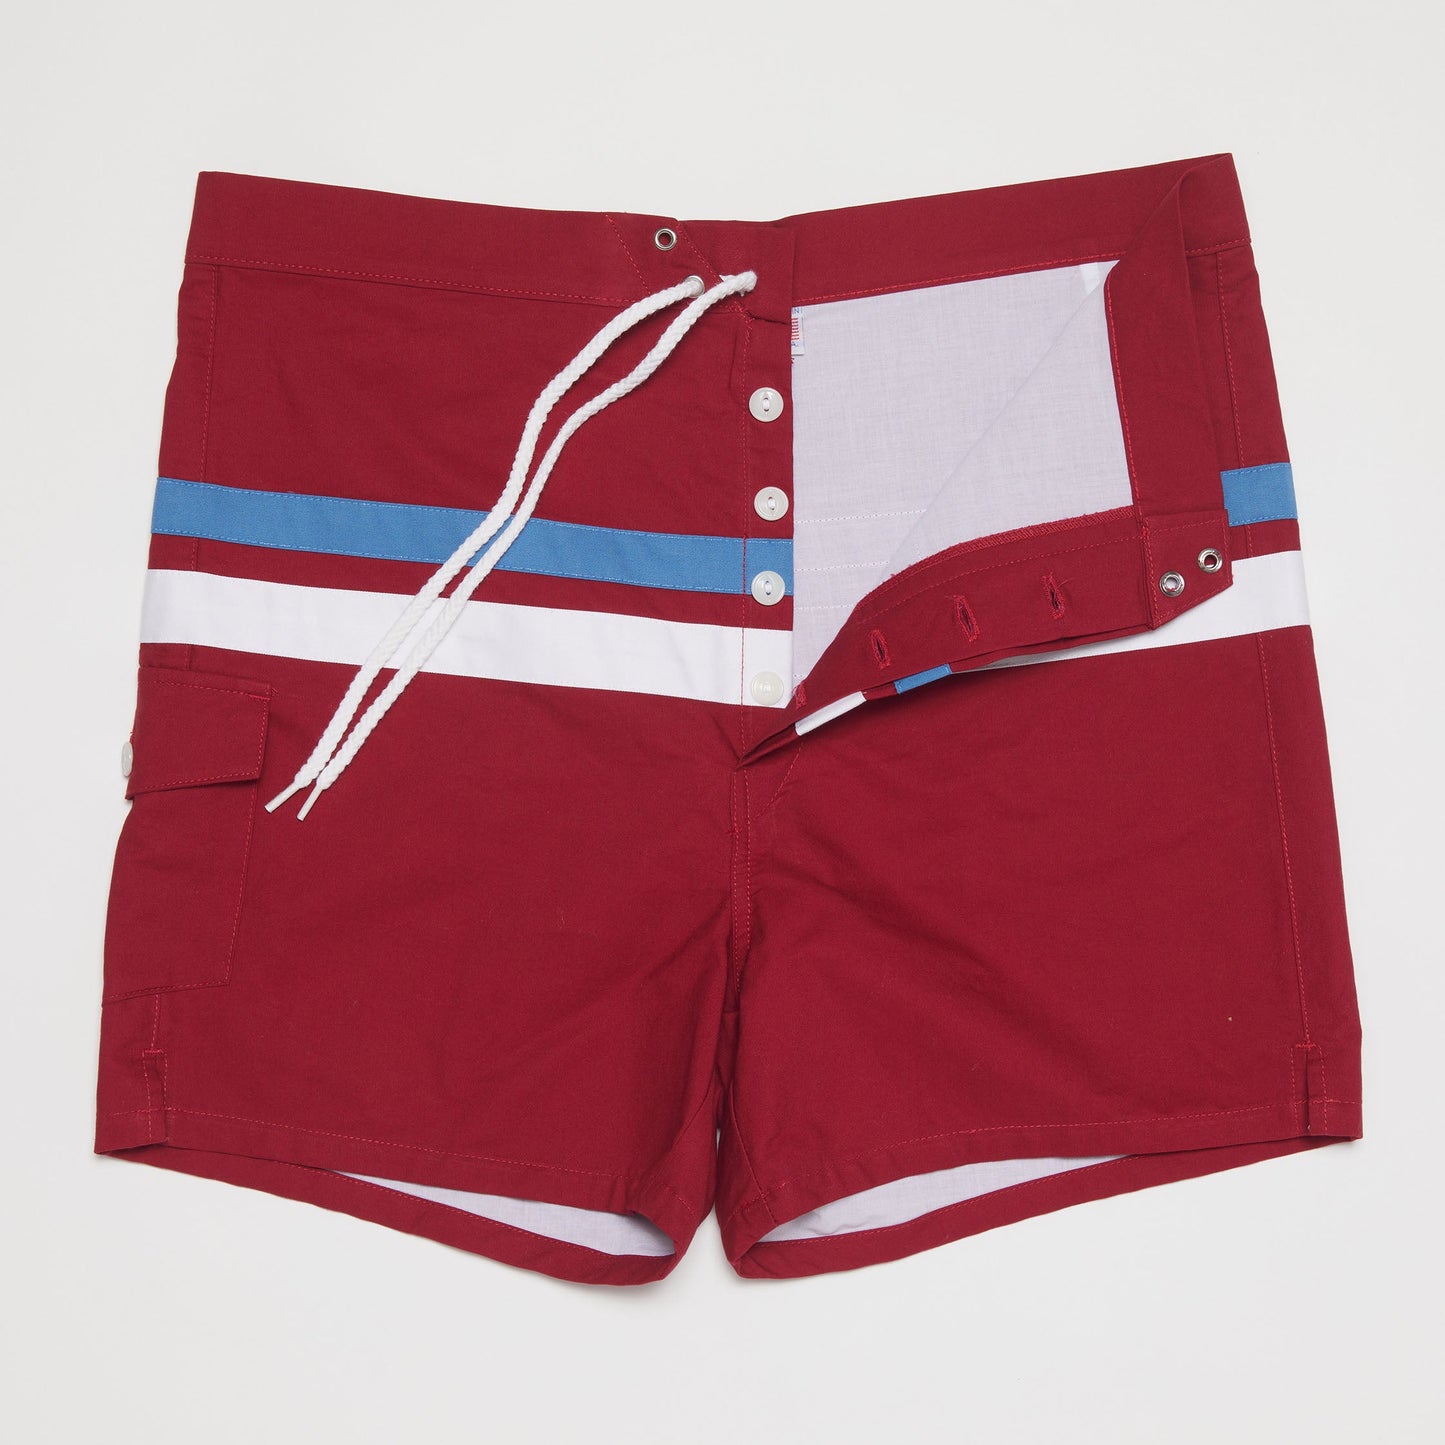 Dual Stripes Trunks (Red)